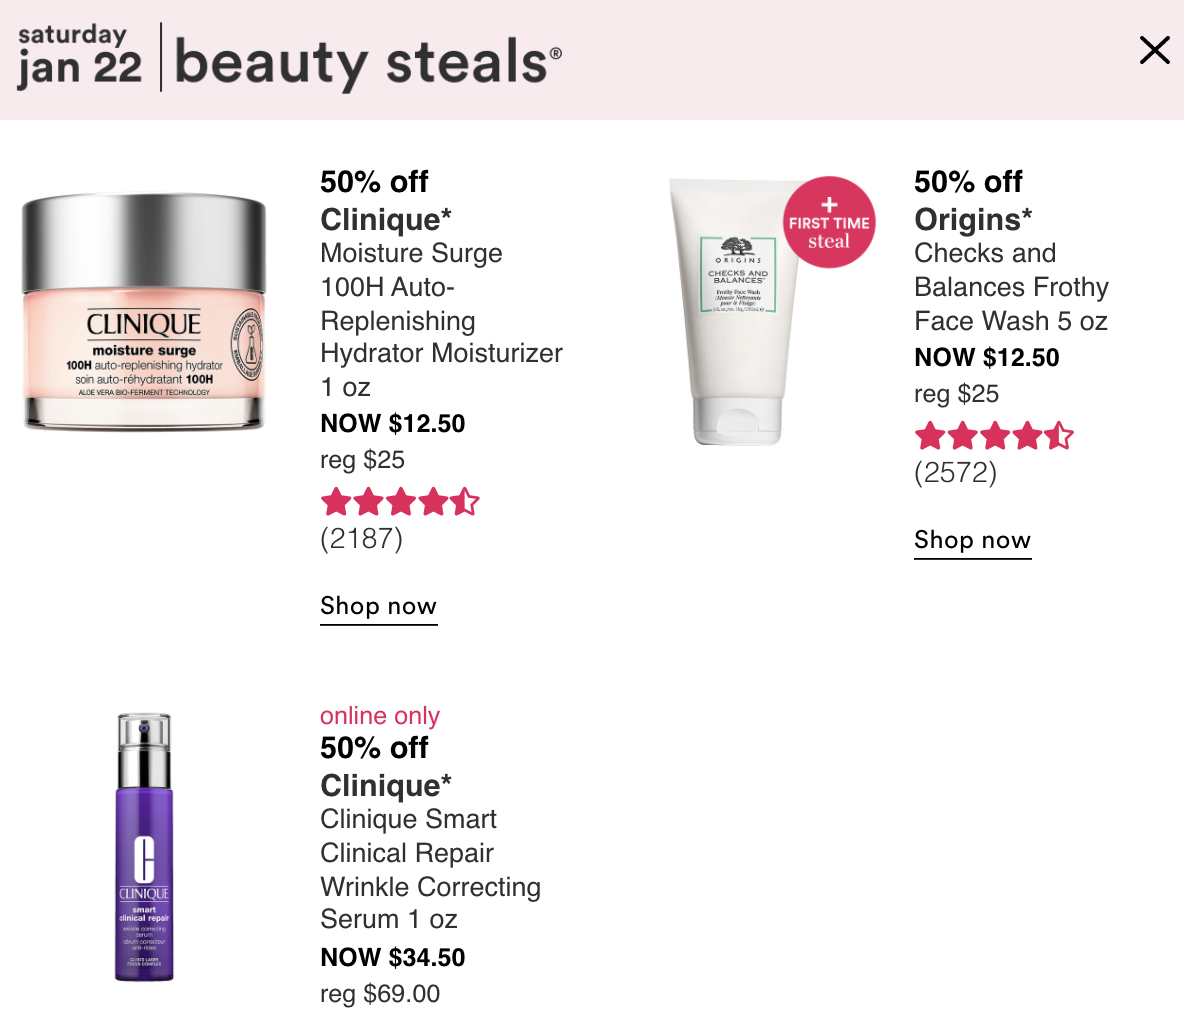 Ulta: Love Your Skin Event - Day 21 (tomorrow) - Gift With Purchase